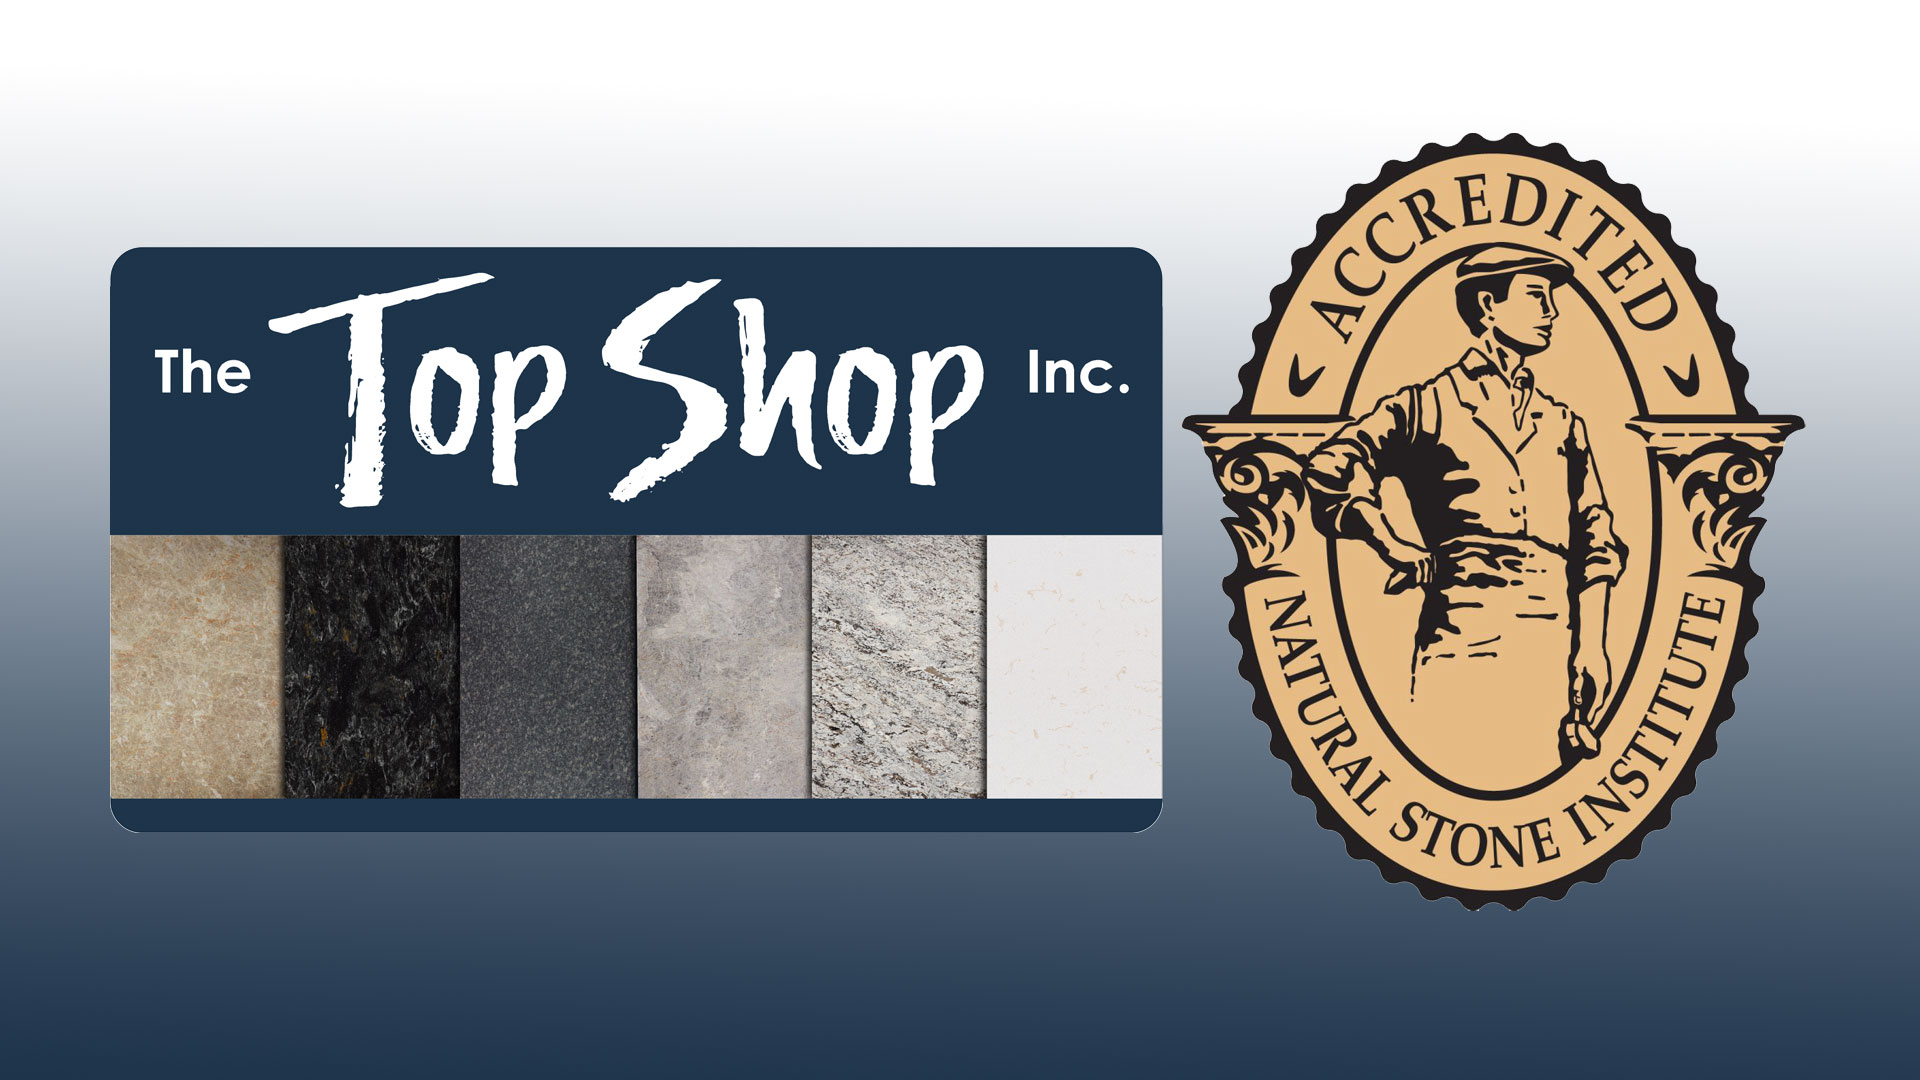 National Stone Institute Accredited The Top Shop Inc